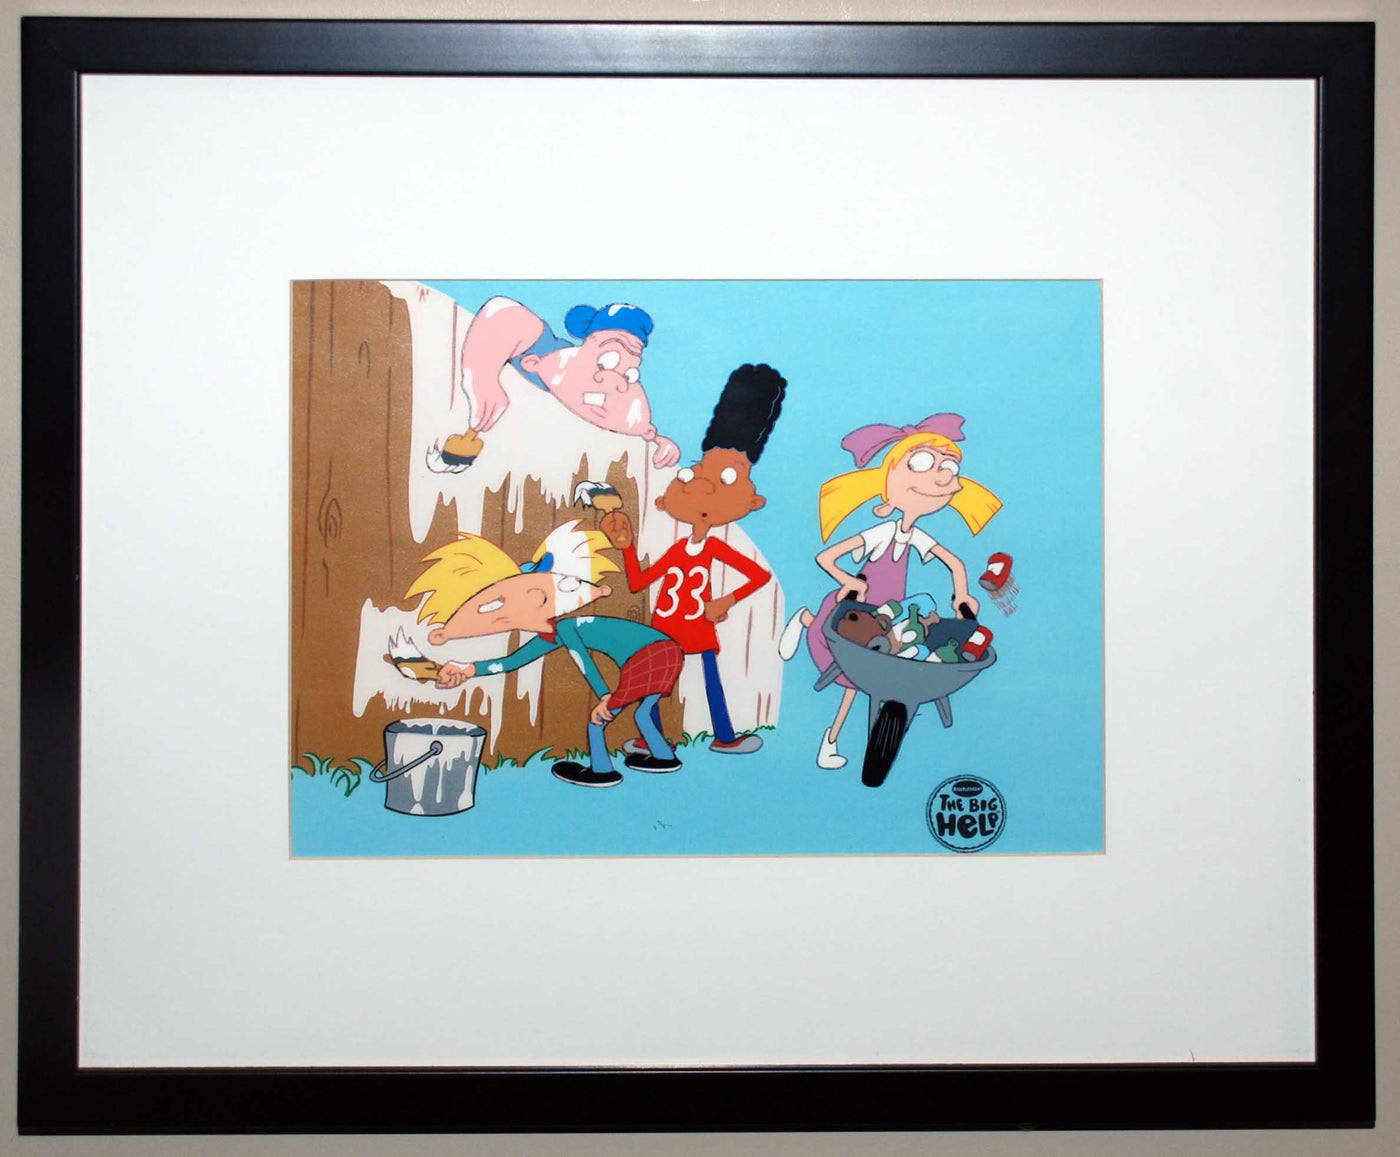 Original Hey Arnold! Production Cel made for The Big Help special